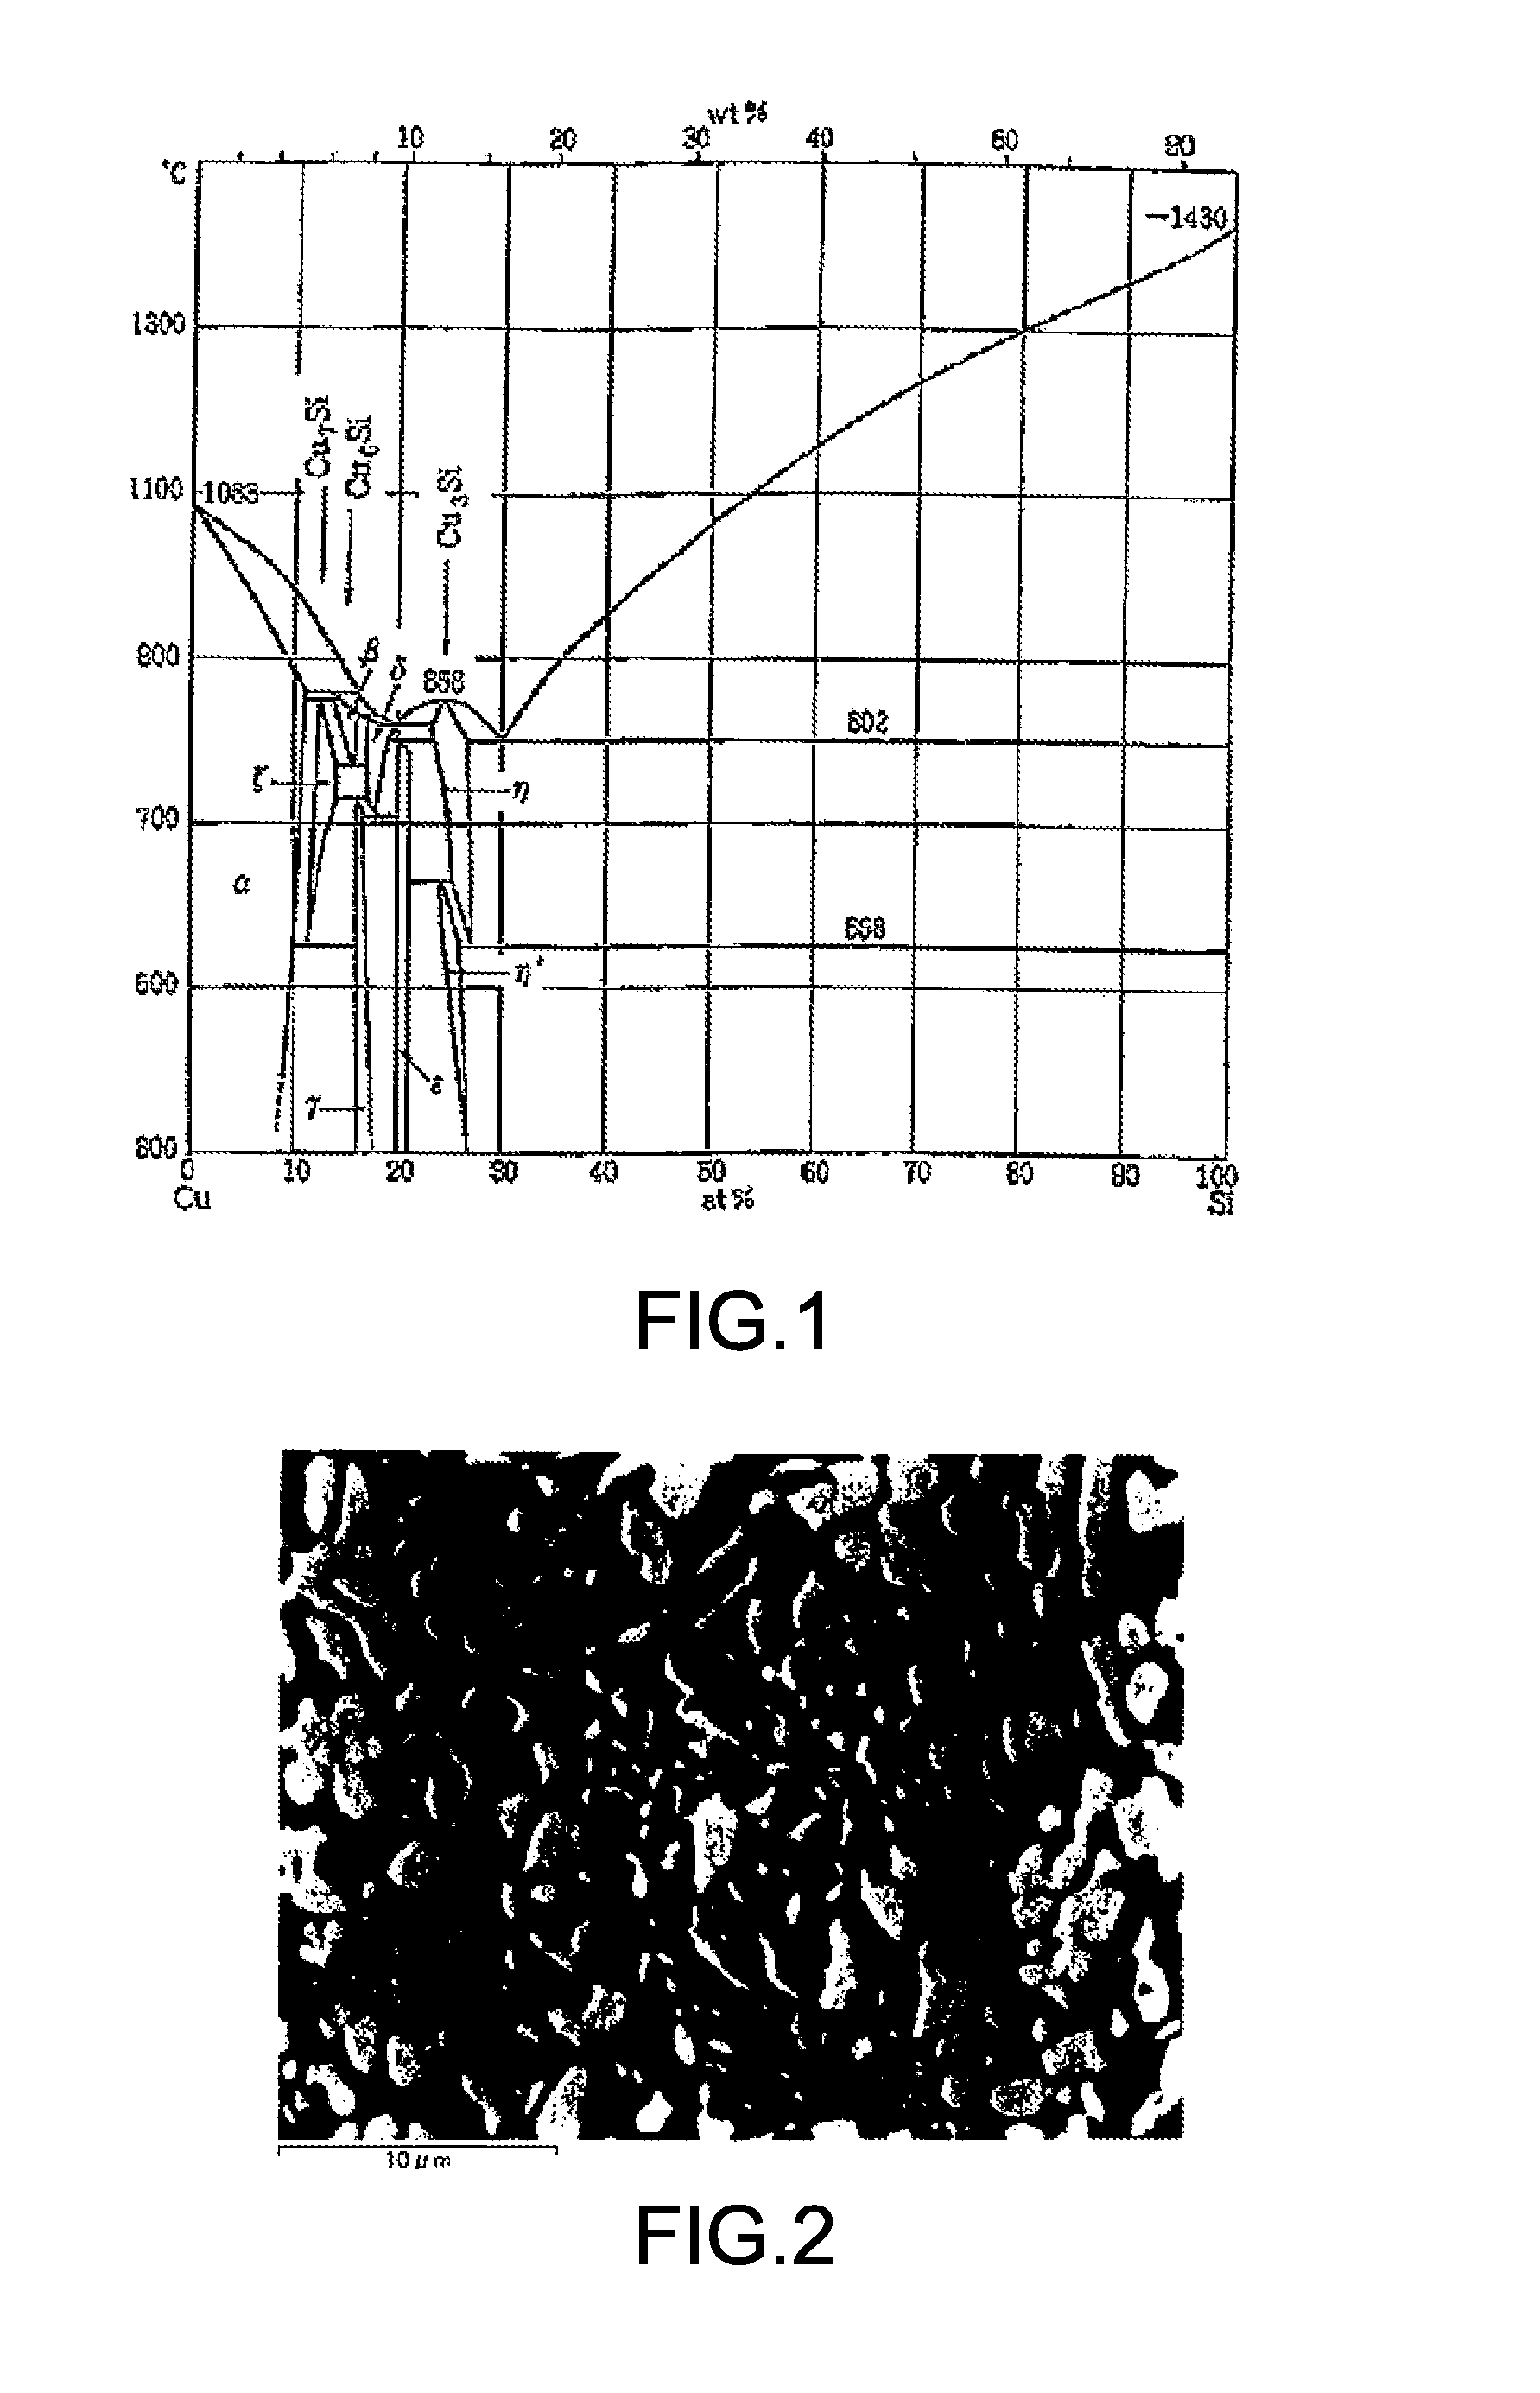 Si-based-alloy anode material